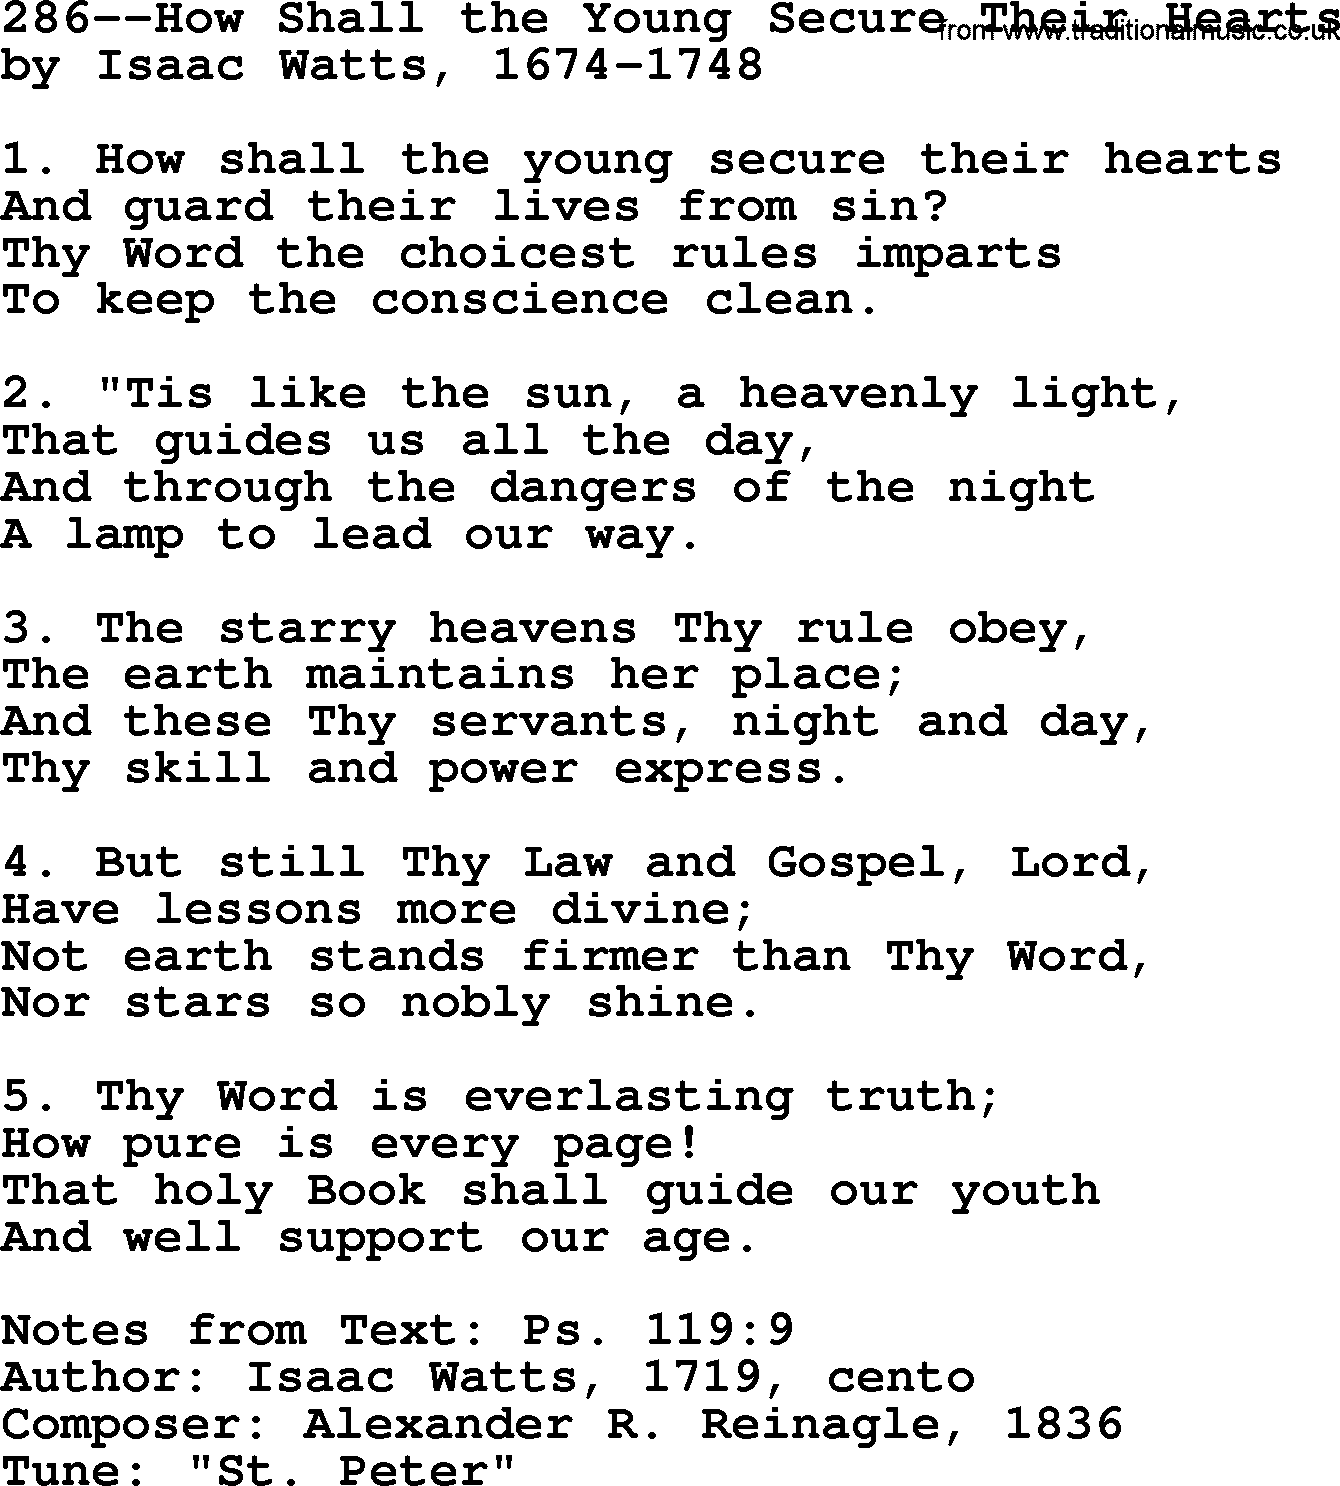 Lutheran Hymn: 286--How Shall the Young Secure Their Hearts.txt lyrics with PDF